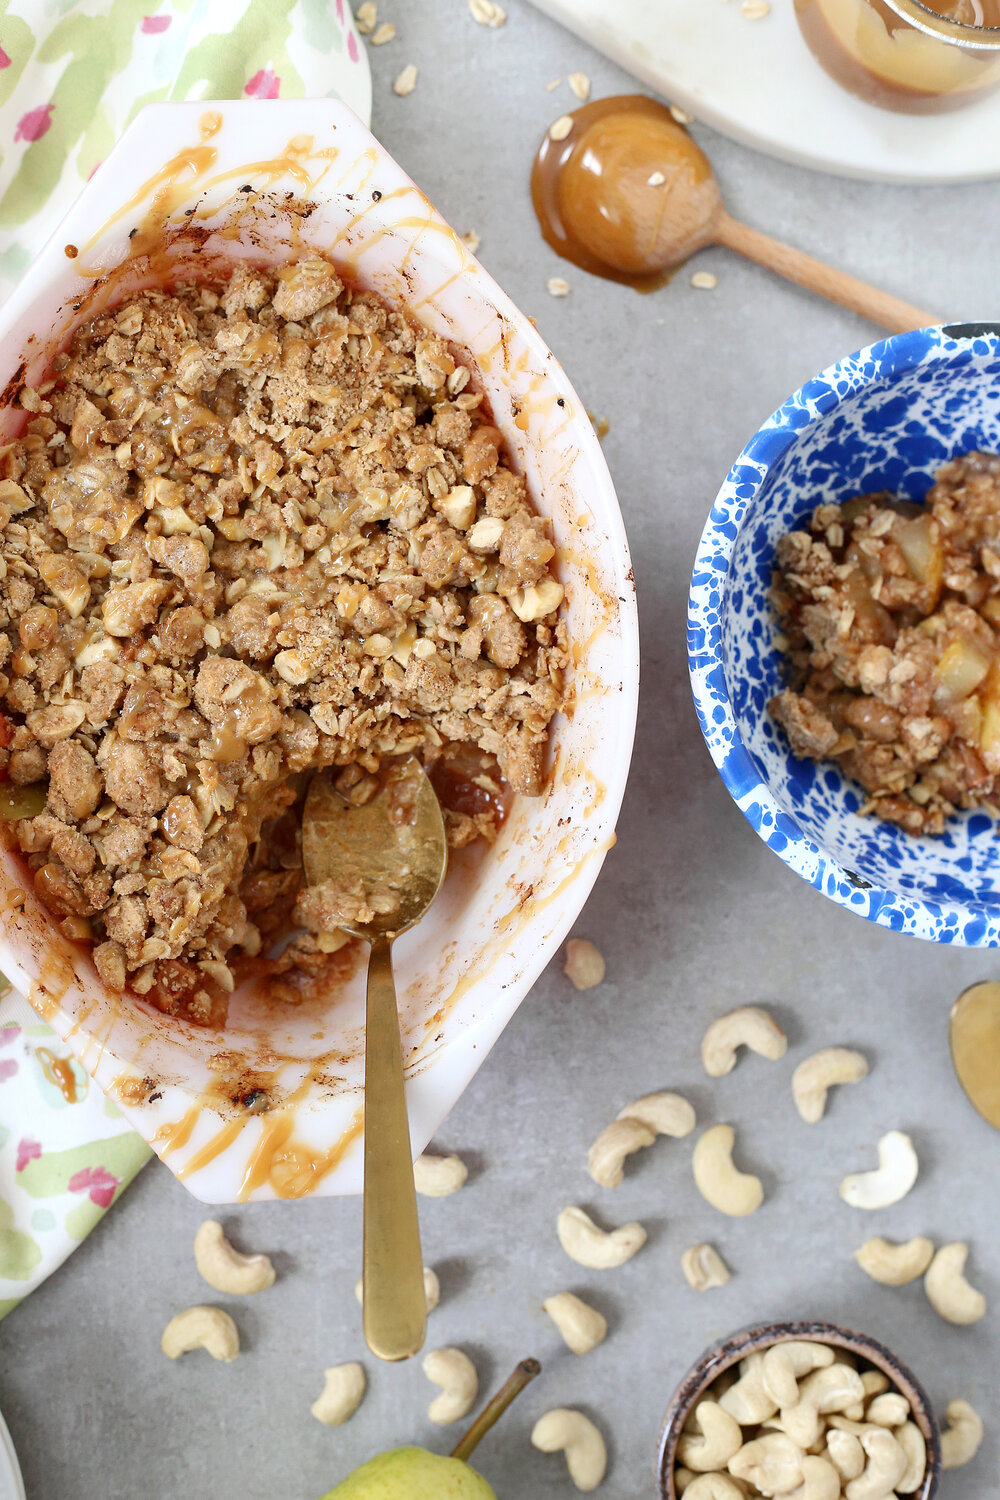 Apple & Pear Crisp with Cashew Topping via UnusuallyLovely.com